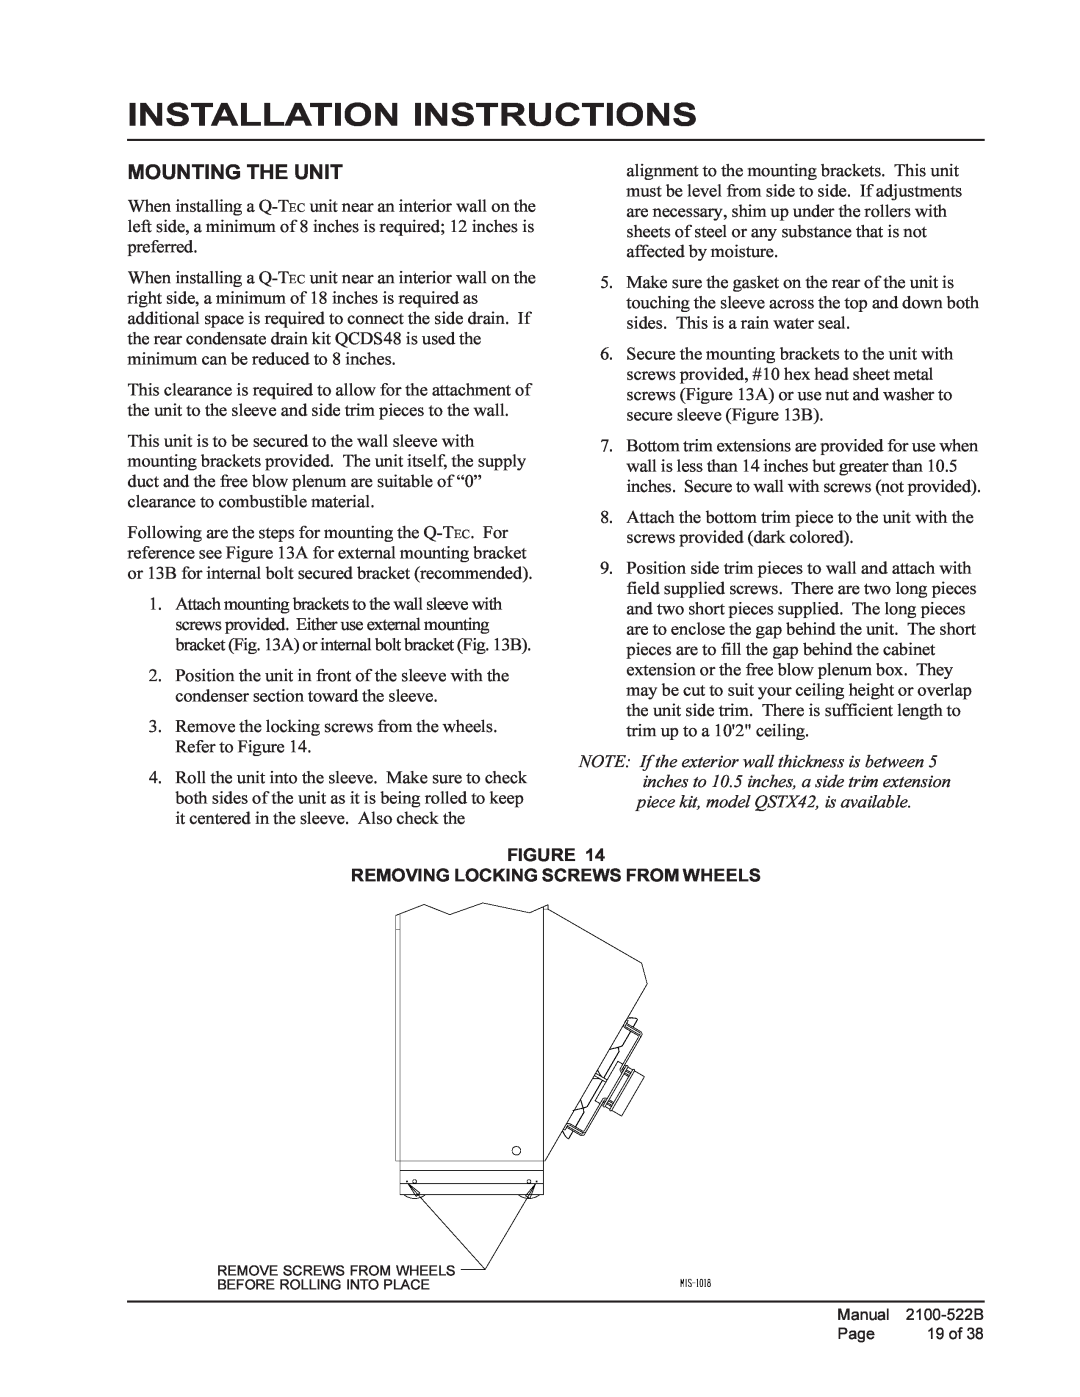 Bard Q36A1, Q30A1, Q42A1, Q60A1 Installation Instructions, Mounting The Unit, Figure Removing Locking Screws From Wheels 